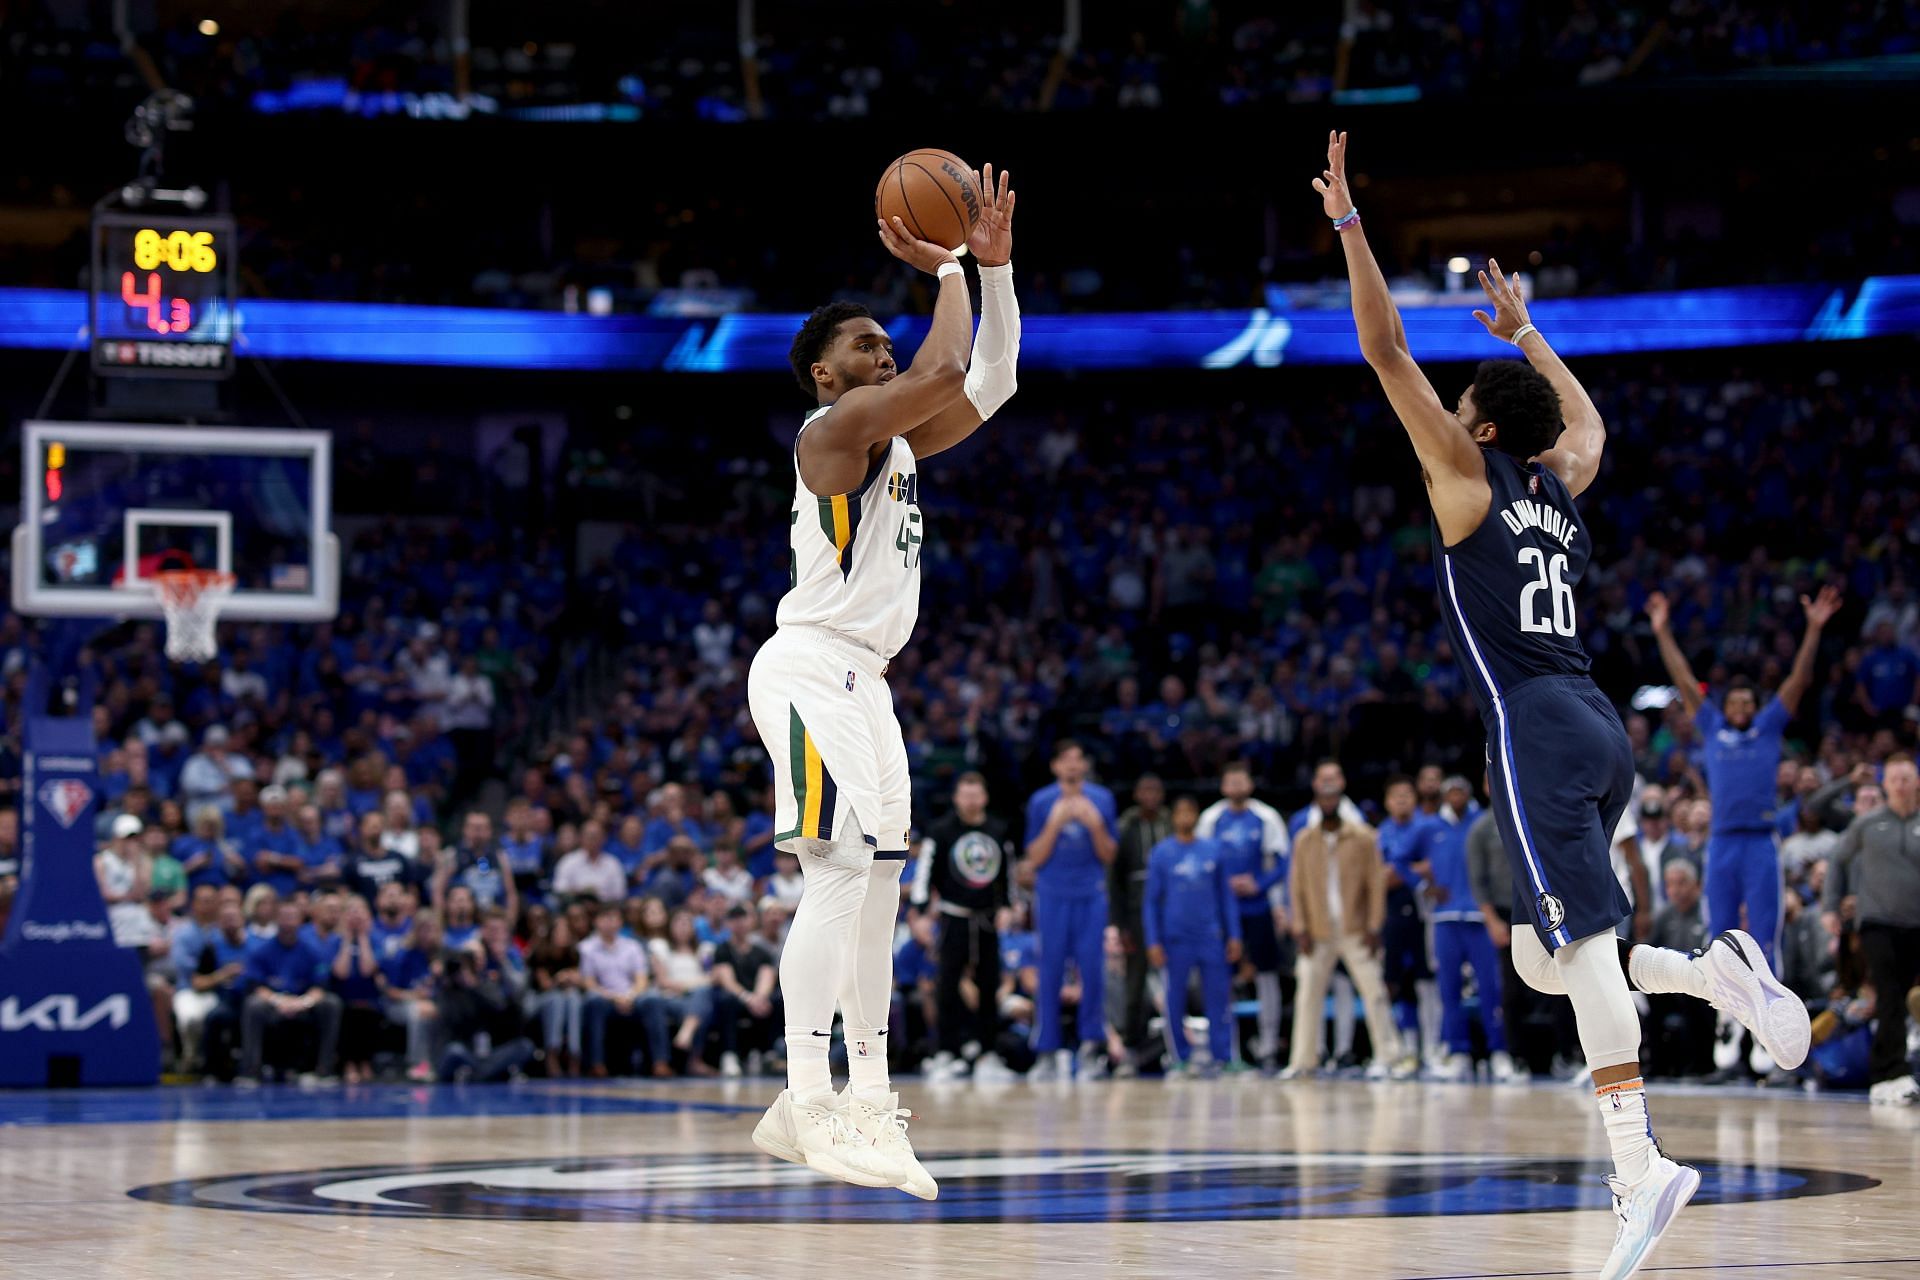 Donovan Mitchell and Utah Jazz will try and take a 2-0 lead Monday night vs. the Dallas Mavericks.